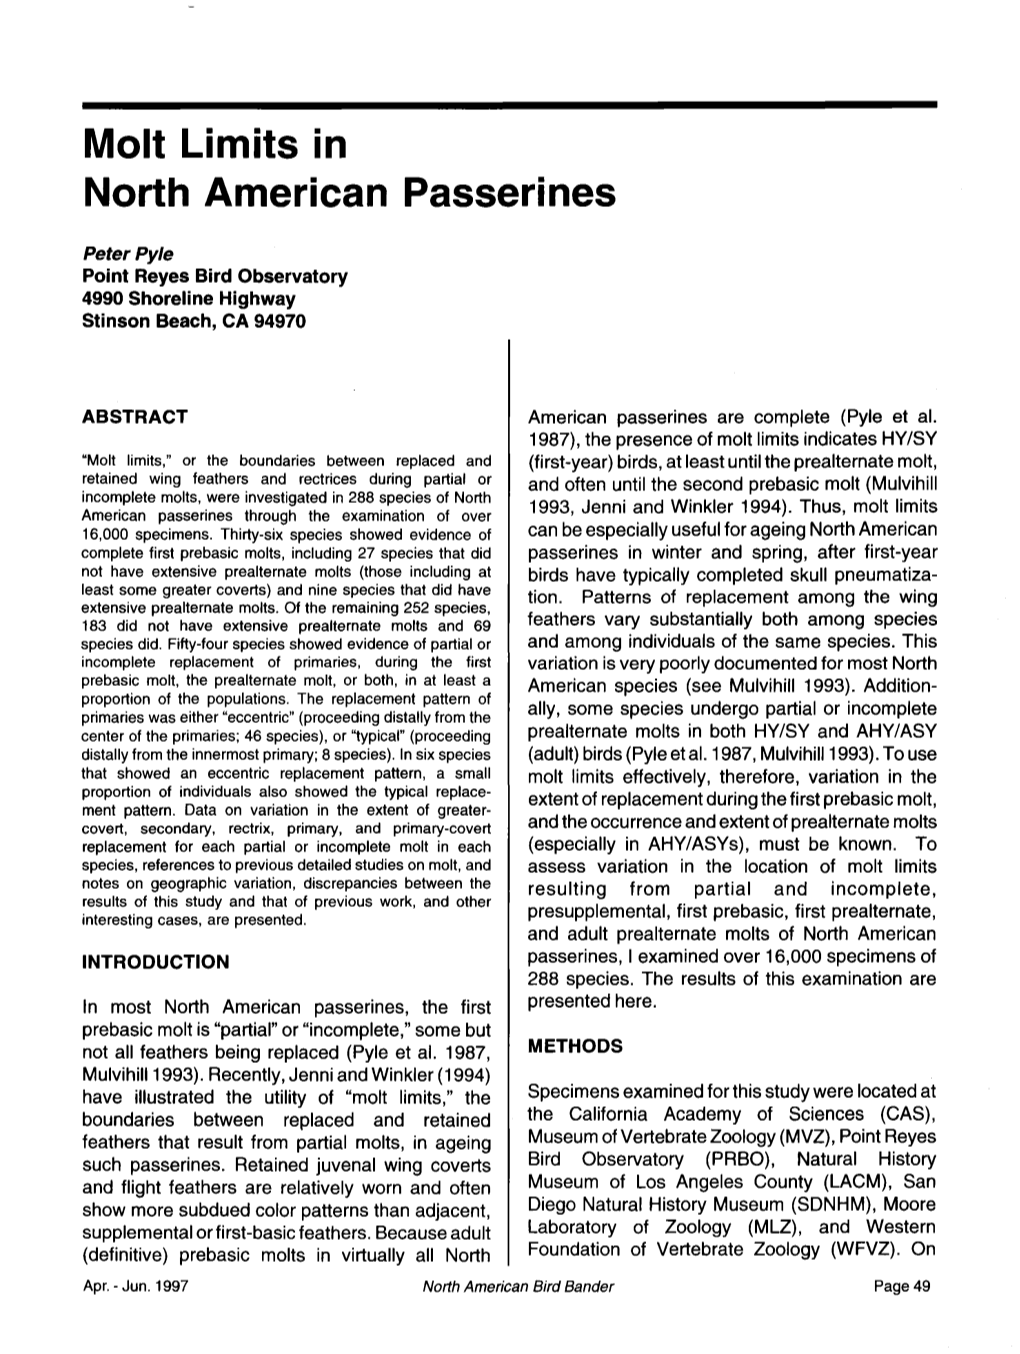 Molt Limits in North American Passerines